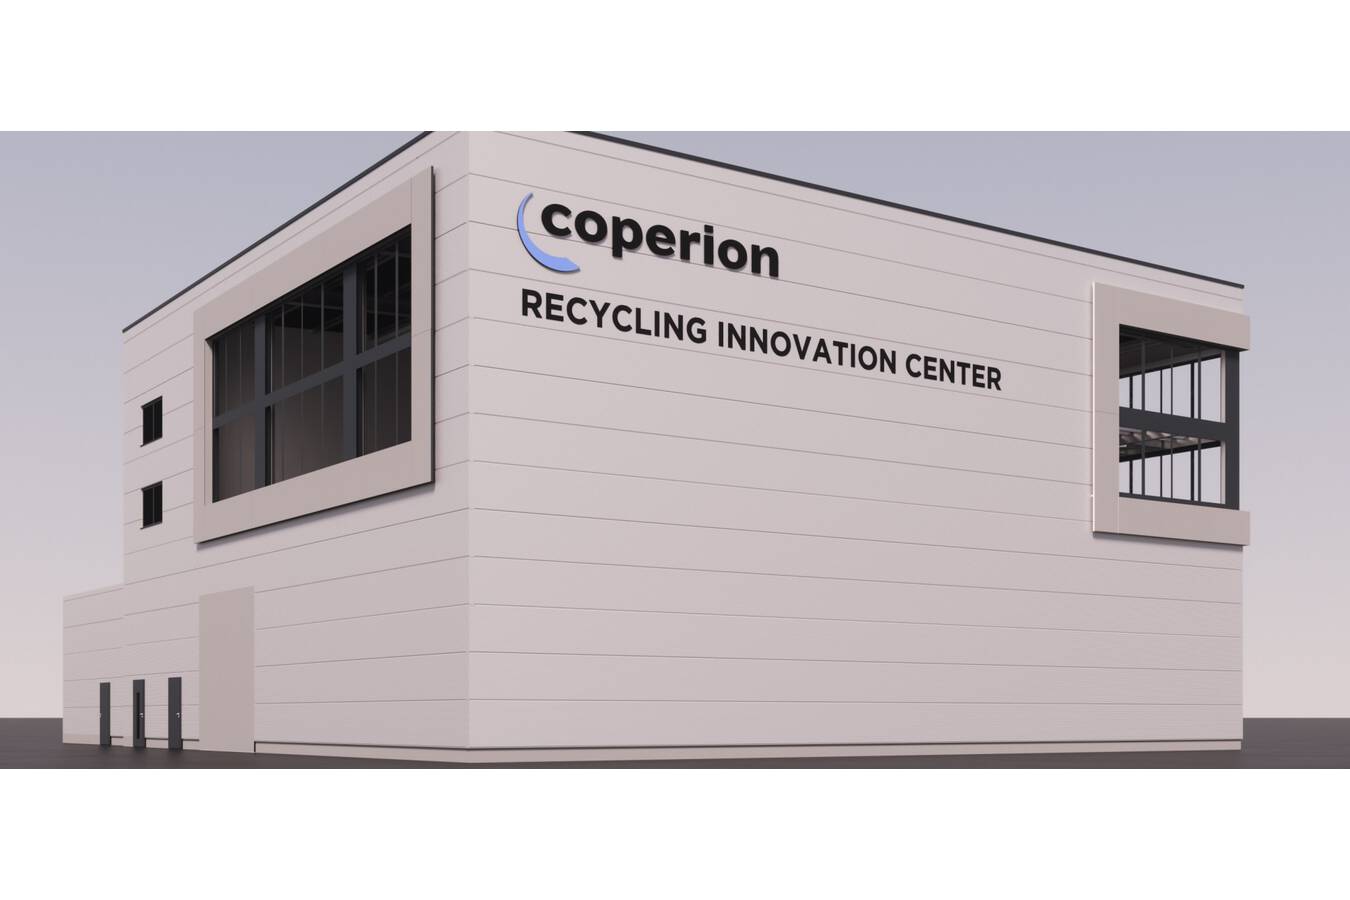 Coperion Recycling Innovation Center: State-Of-The-Art Test Lab Construction of a new state-of-the-art test laboratory for plastics recycling applications. Forward-looking investment for more sustainability in plastics recycling.